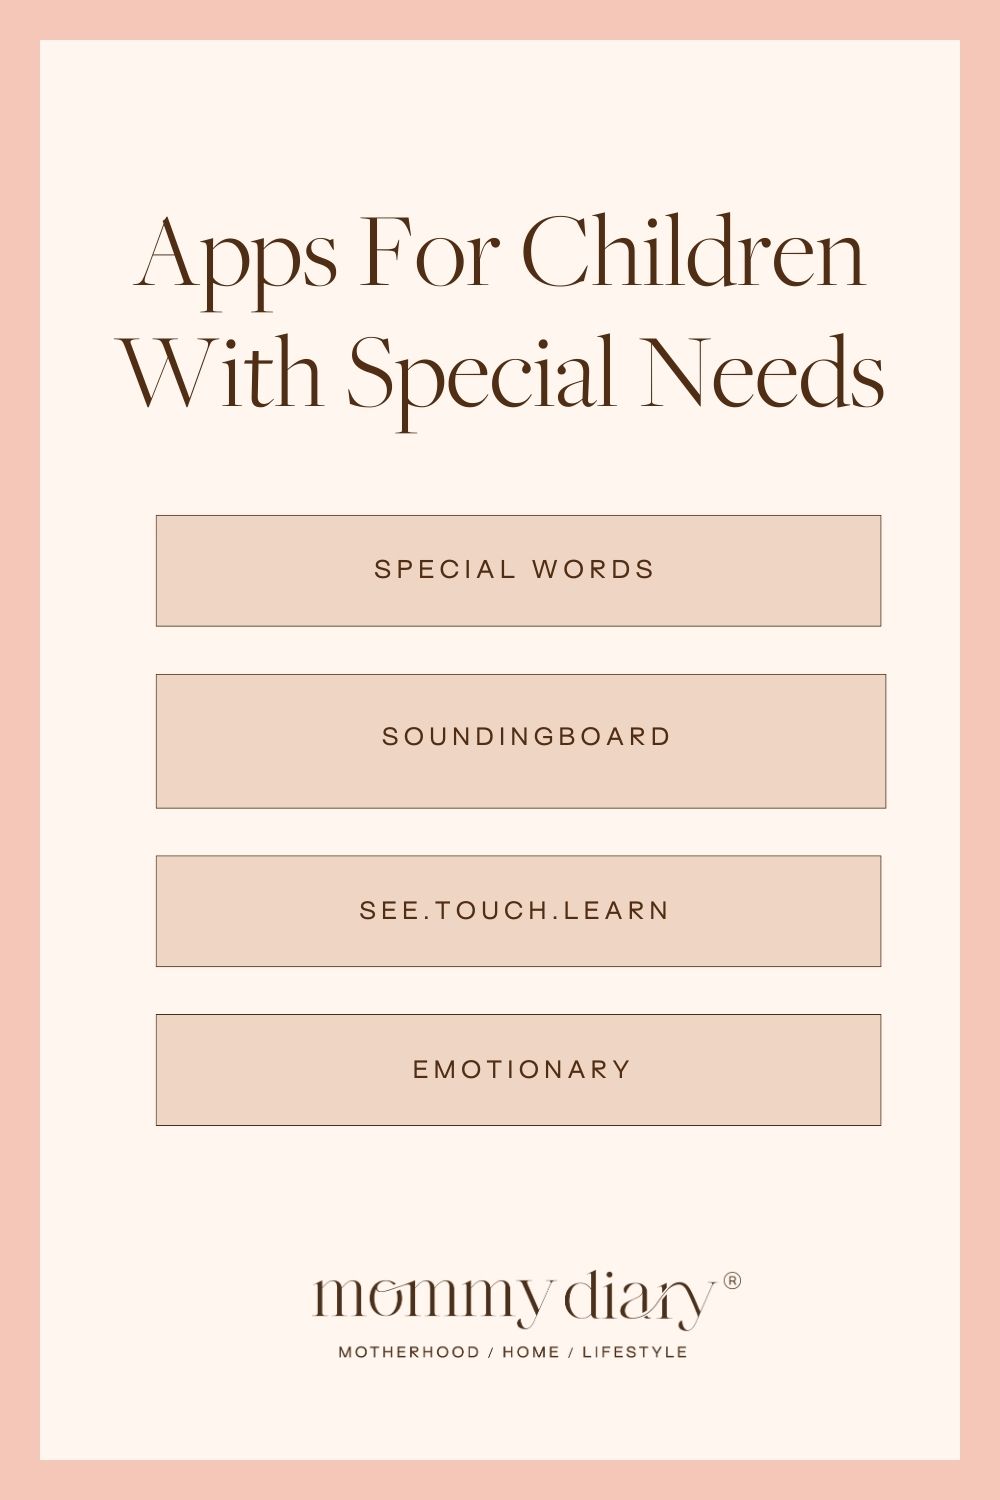 10 Apps For Children With Special Needs part 2